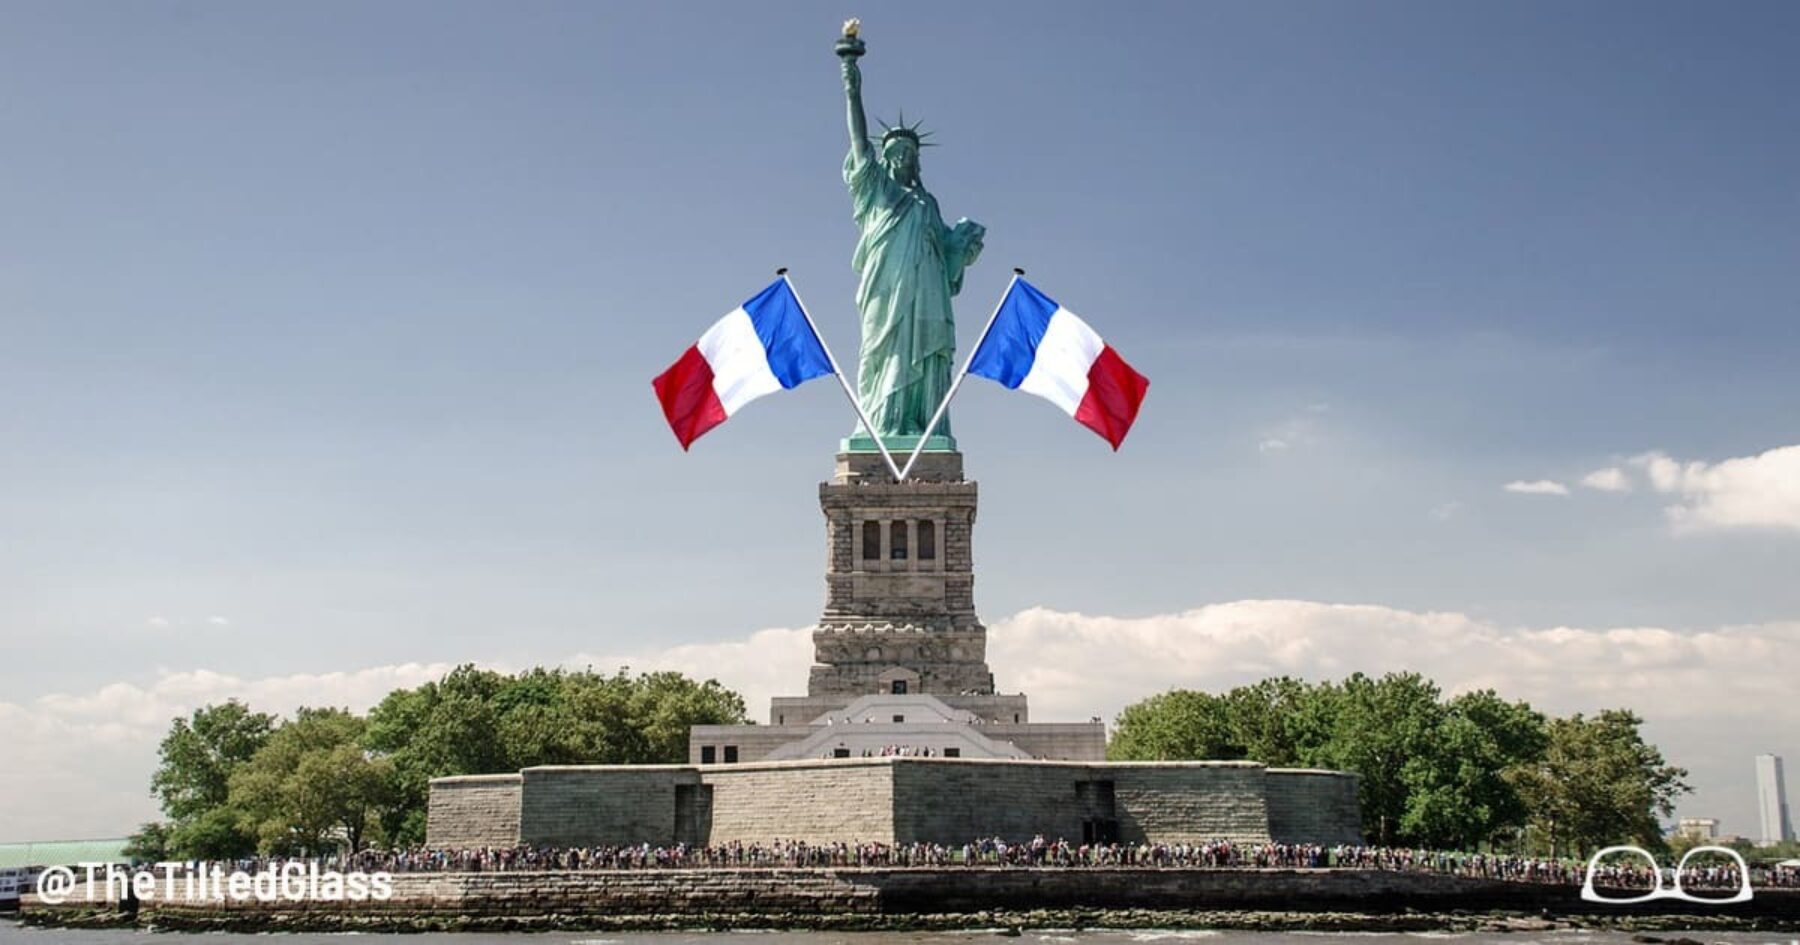 Anti-Immigration Groups Move to Return Statue of Liberty to France